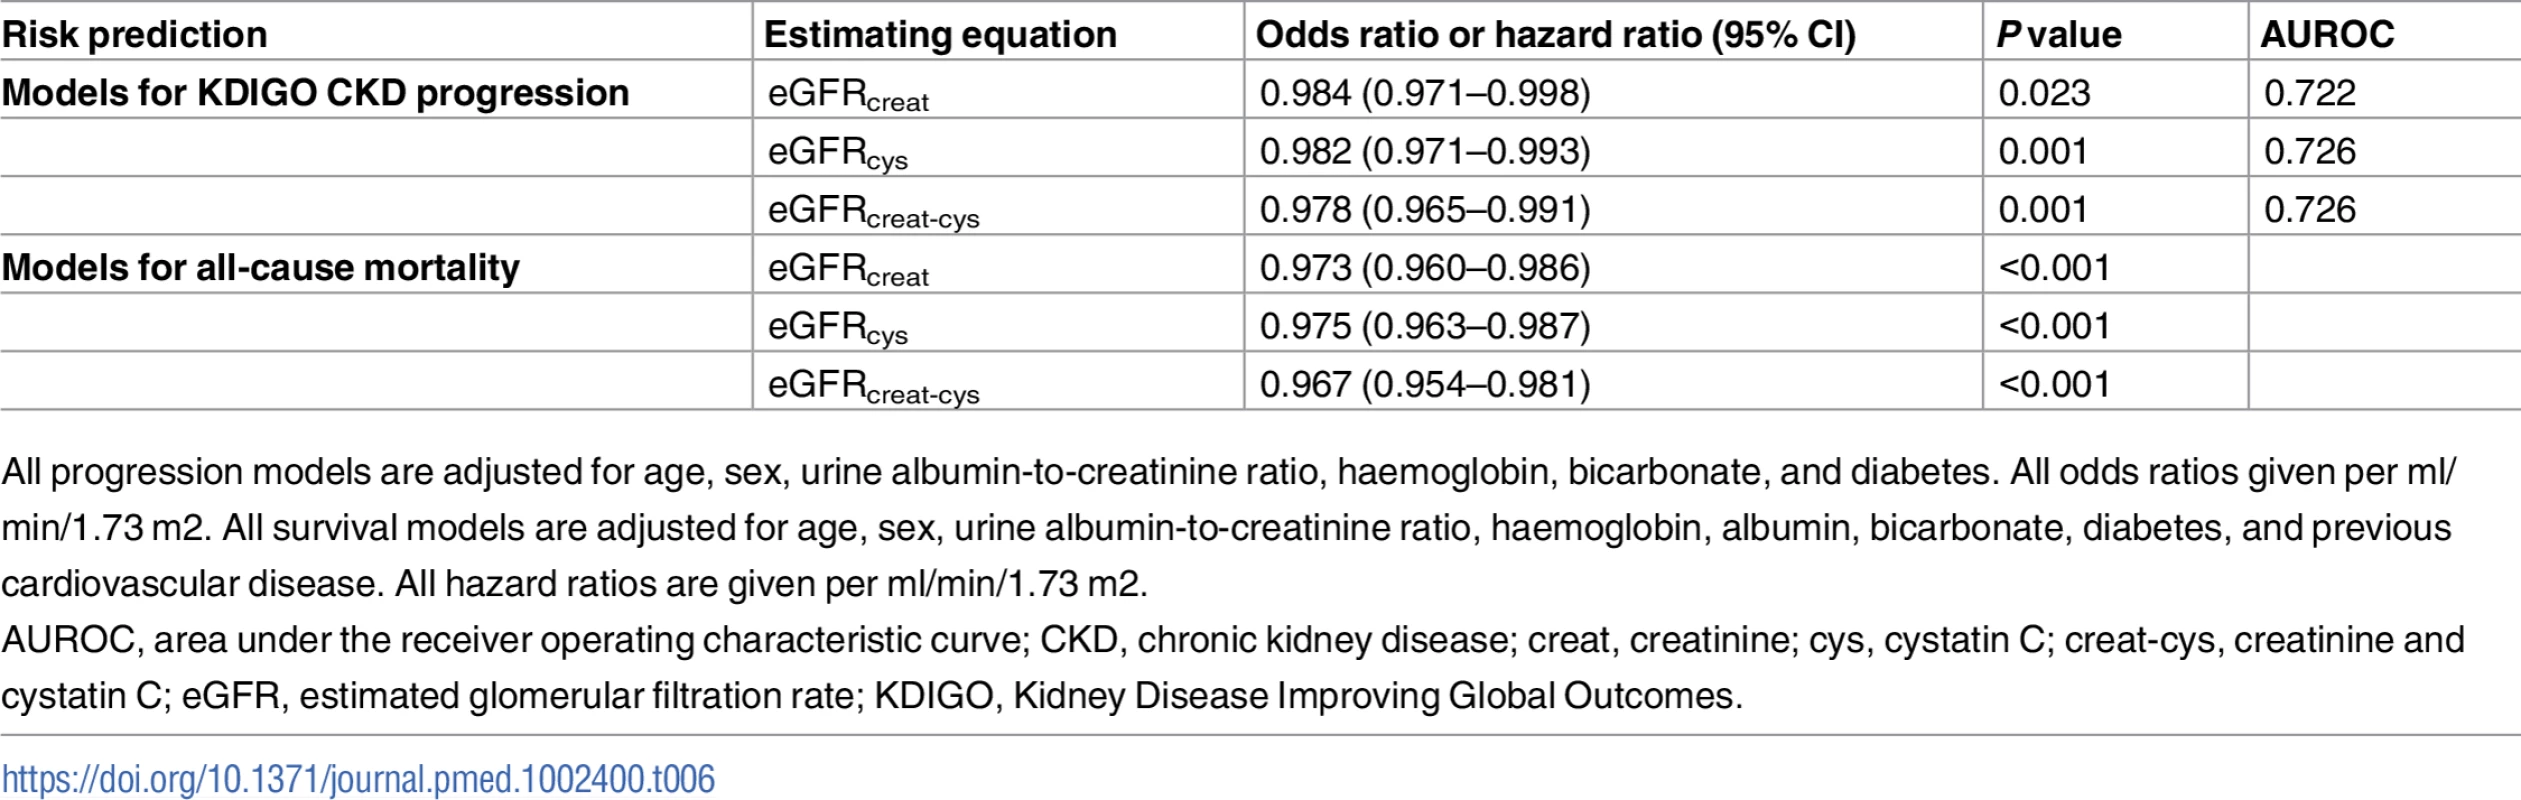 Risk prediction models for CKD progression in 999 participants and all-cause mortality in 1,732 participants using different estimating equations for eGFR.